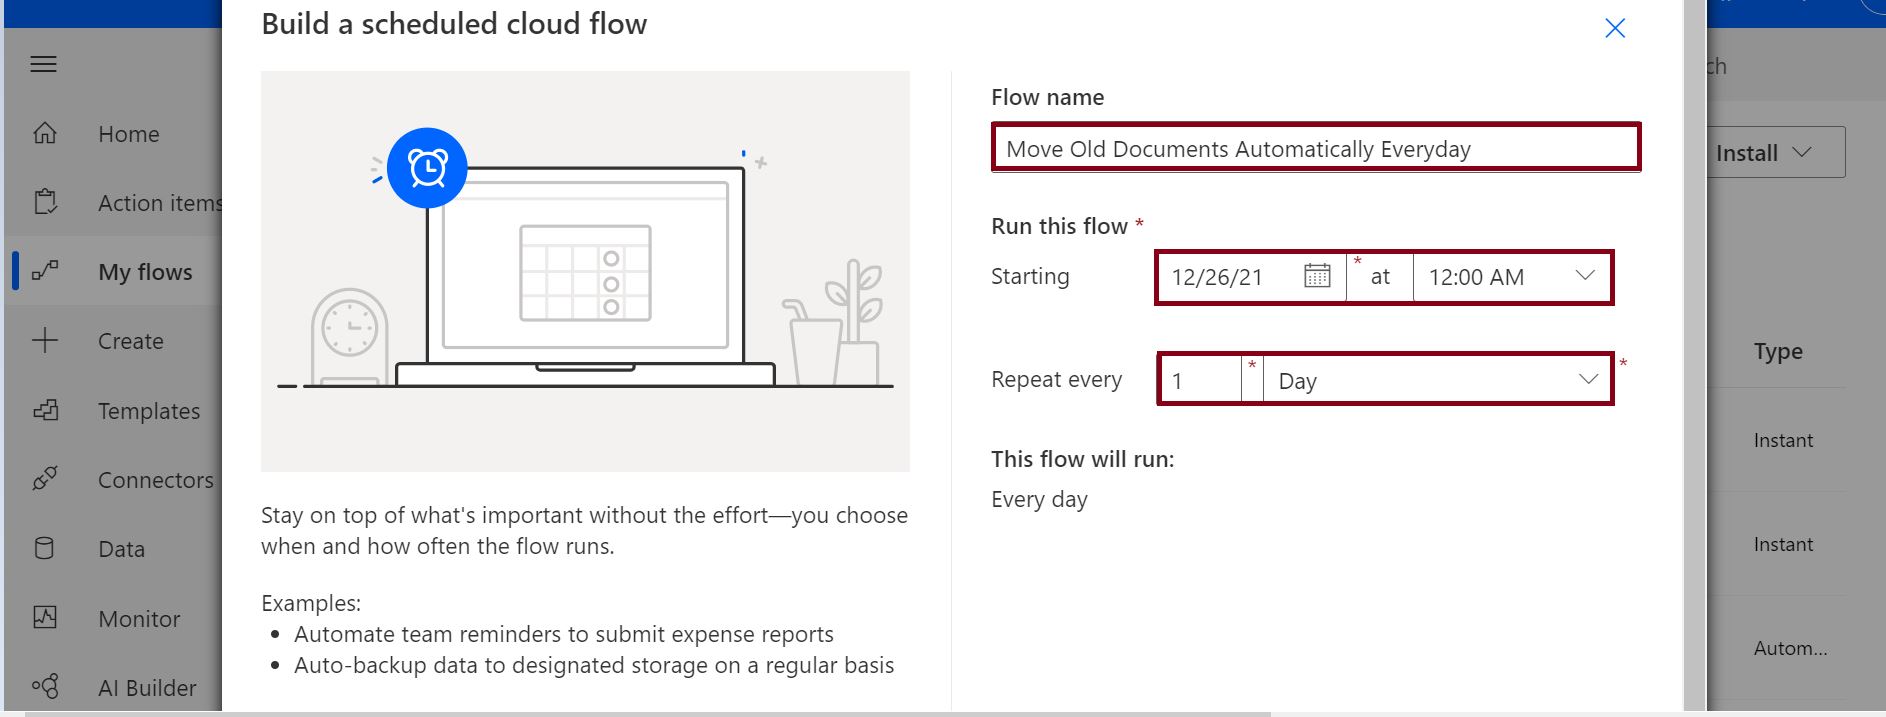 Build a scheduled cloud flow in Power Automate